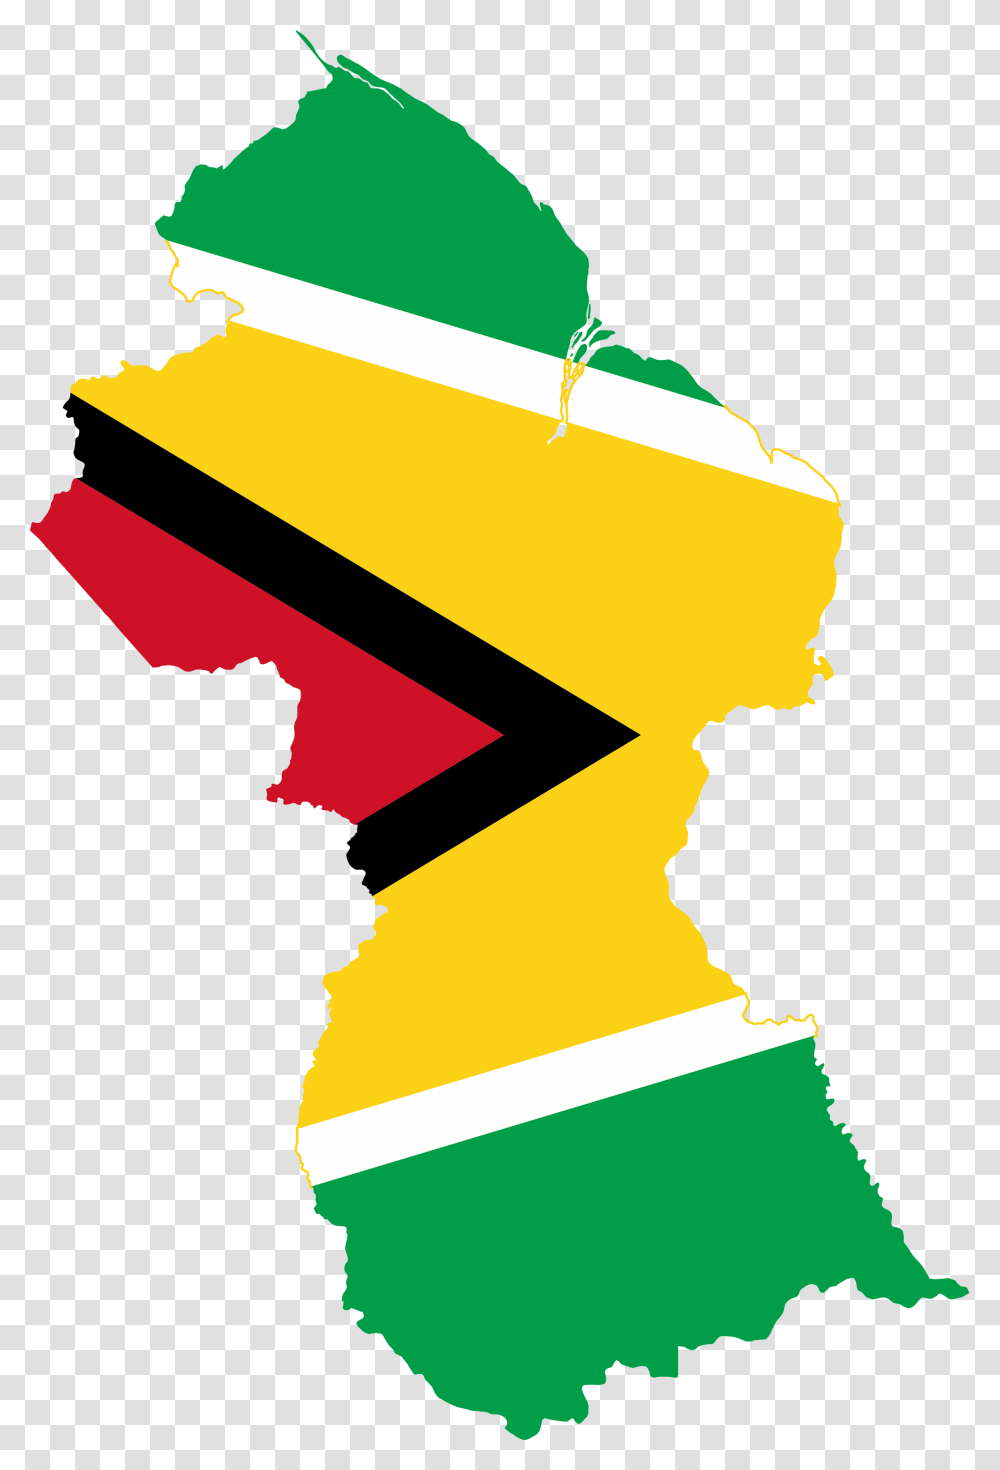 South American Flags South American Countries Guyana Map Of Guyana Showing Administrative Transparent Png